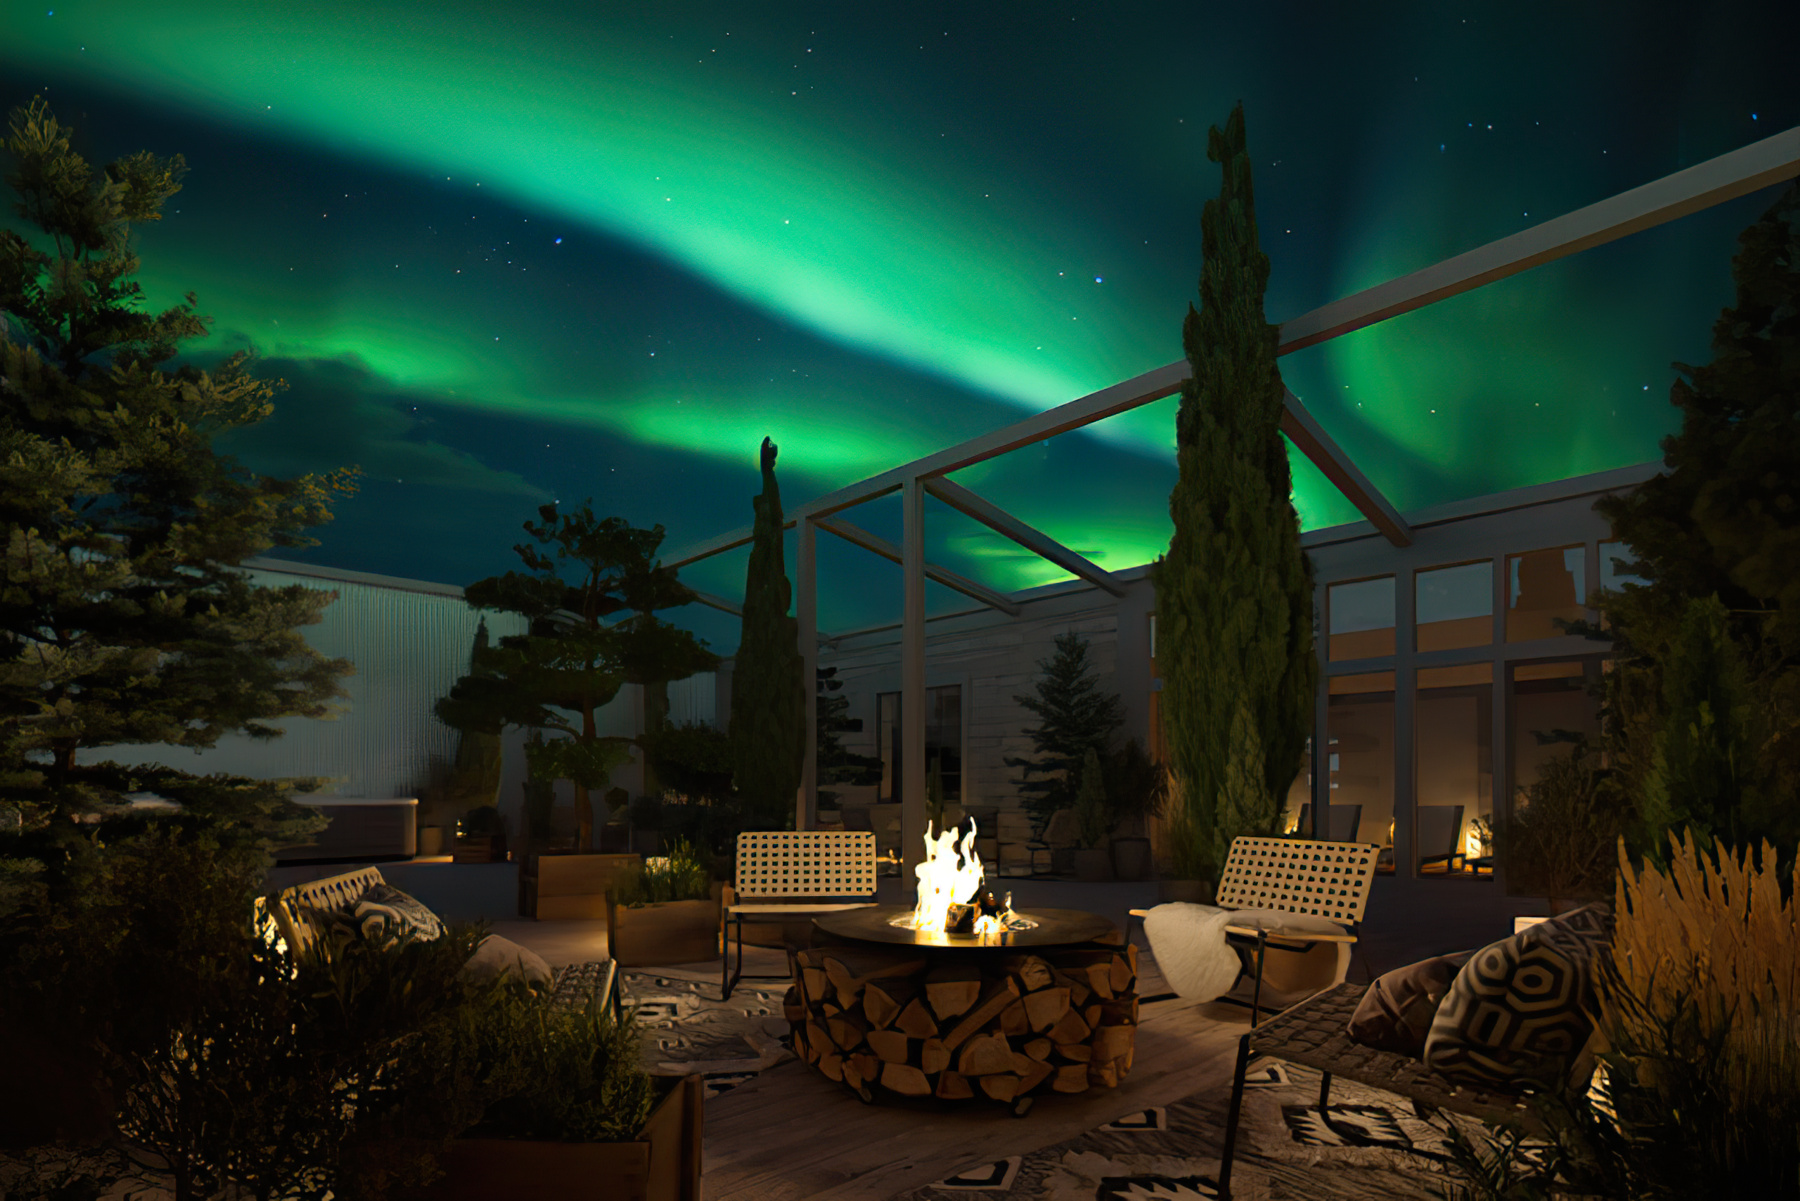 A fire pit sits in the middle of a modern rooftop deck under the green northern lights